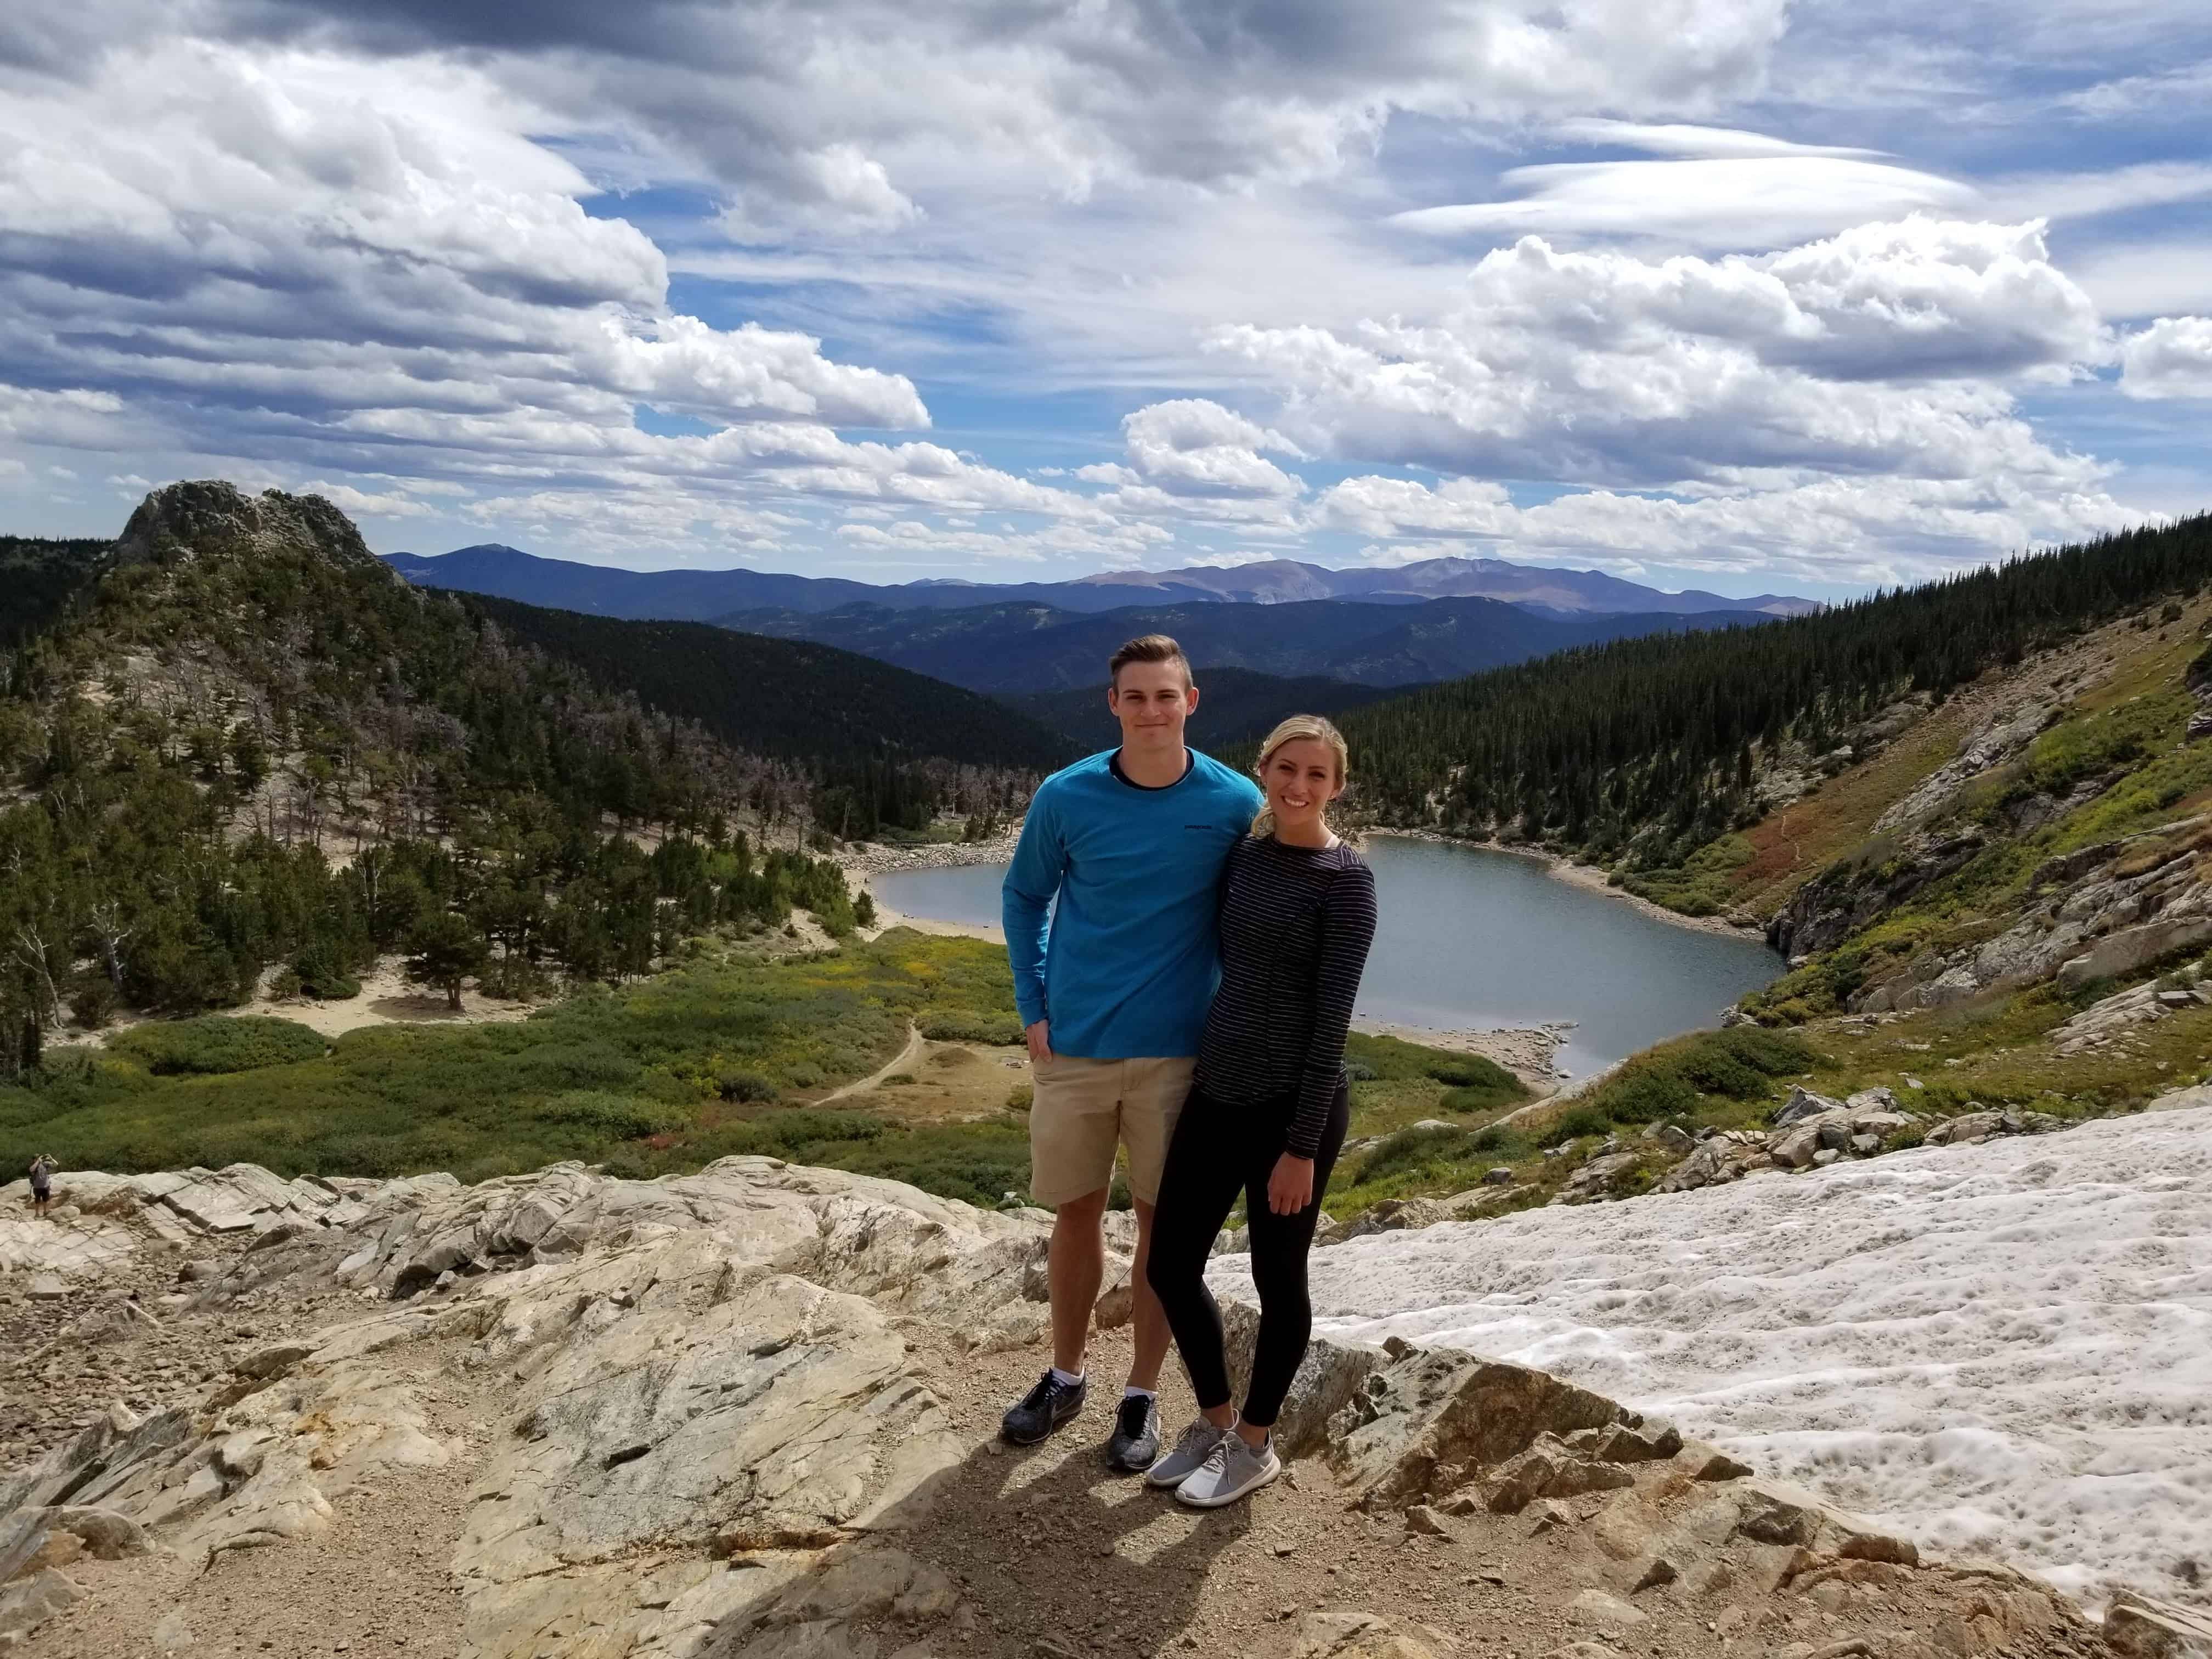 posing at St Mary's glacier - a hike in colorado from our first trip together